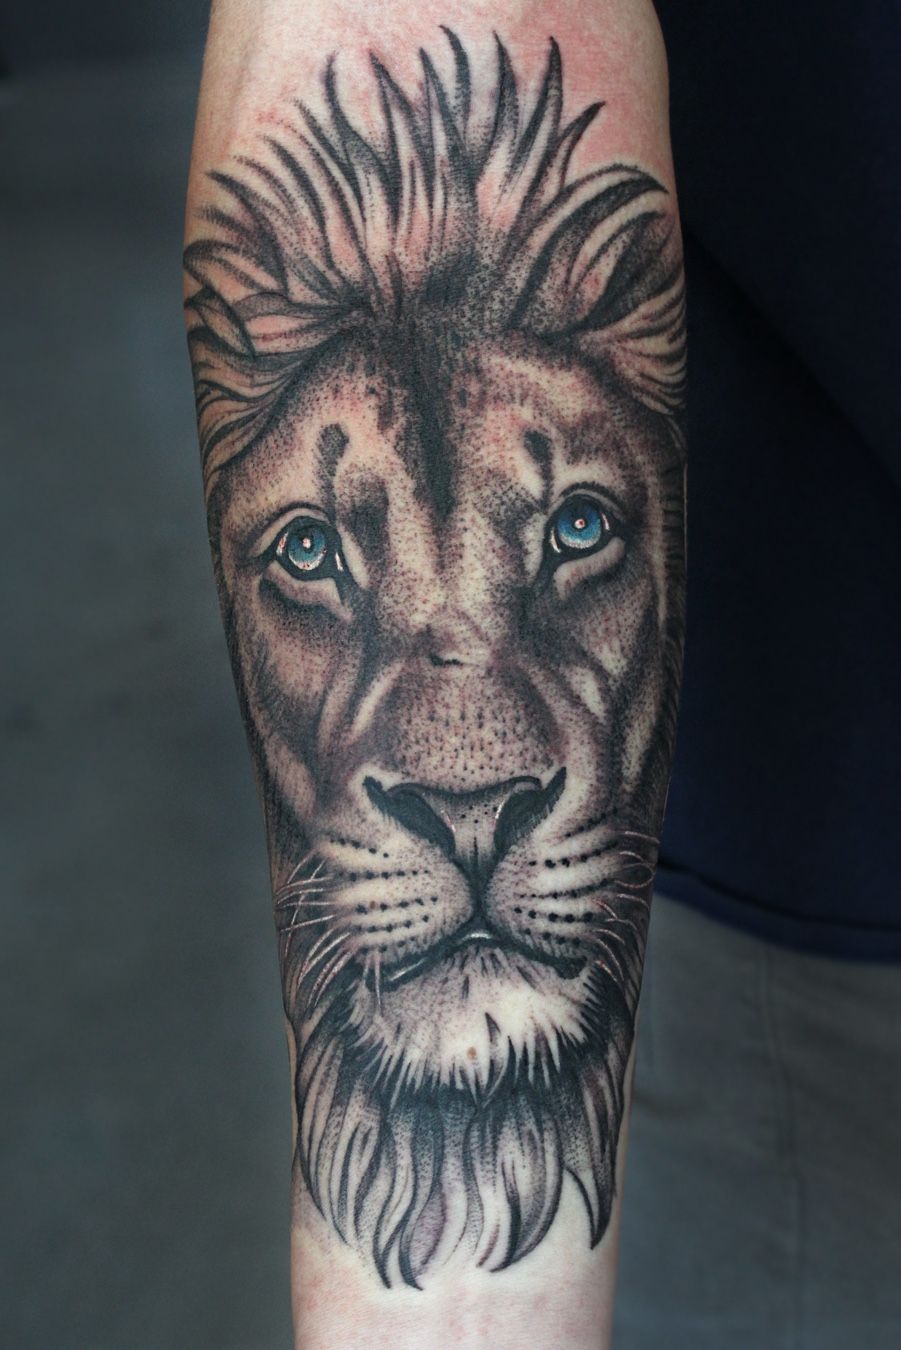 12 Best Lion Tattoo Ideas  Lions With Blue Eyes  PetPress